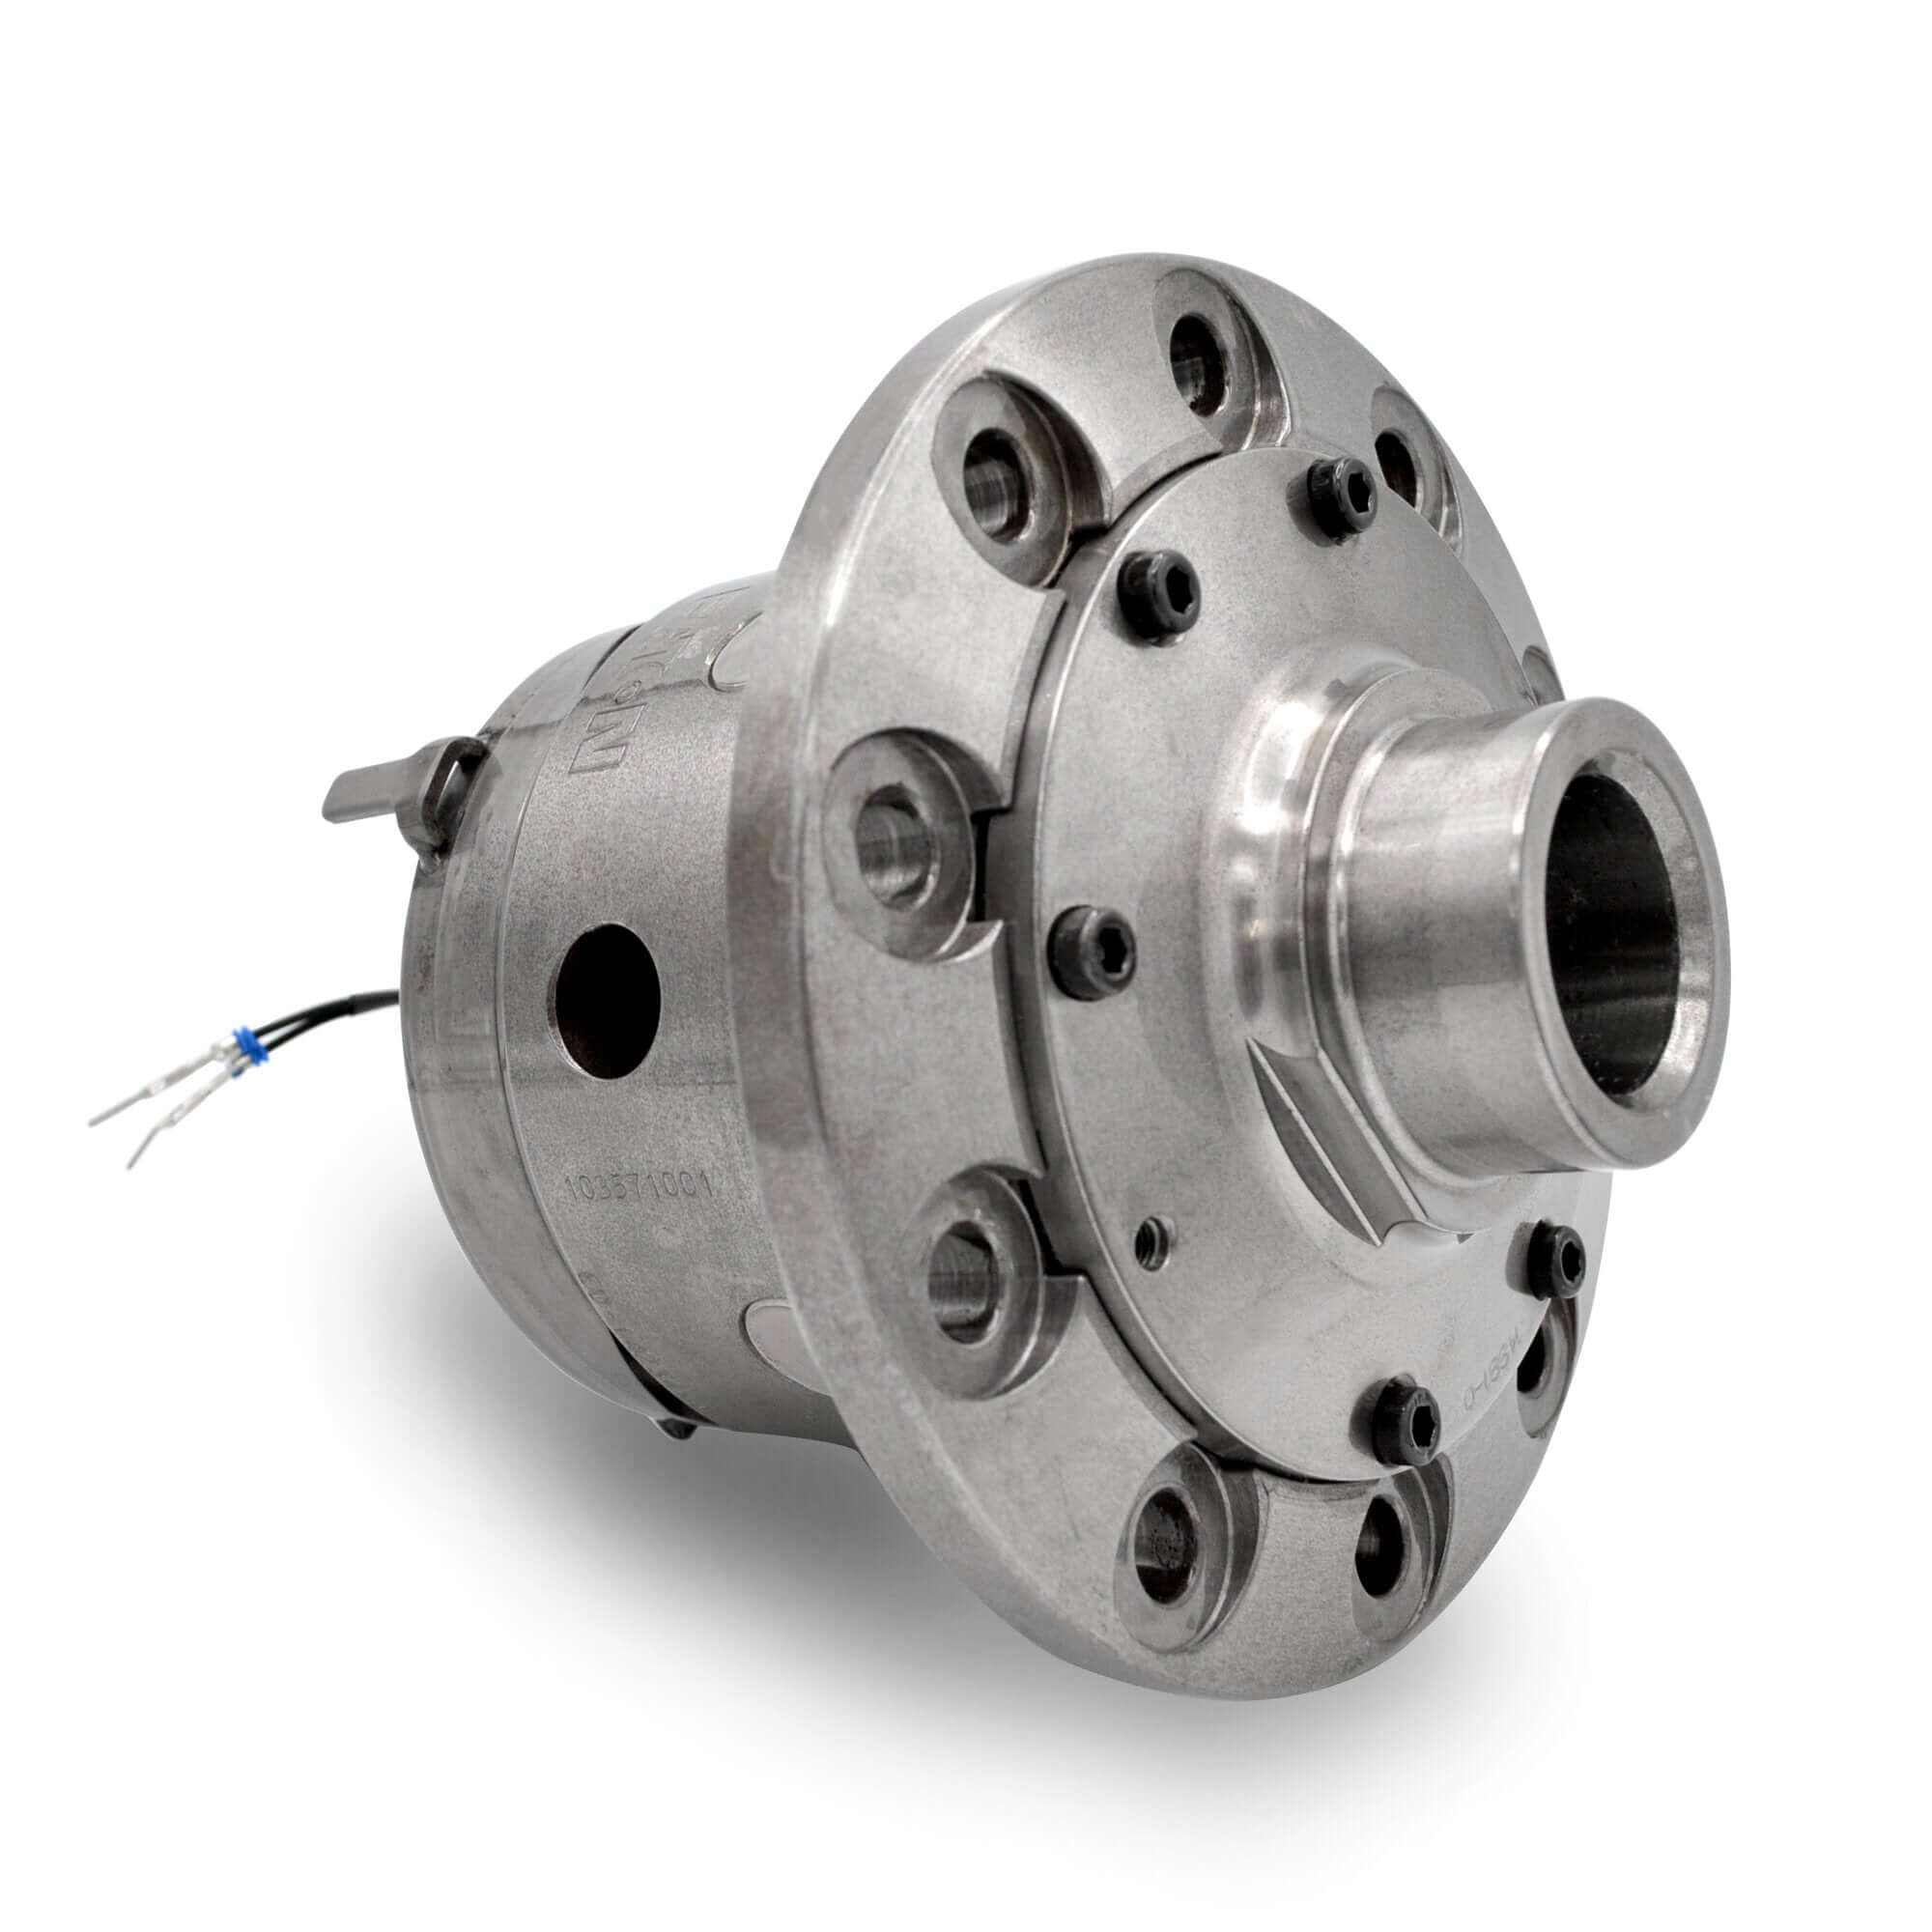 EATON ELocker Dana 60 differential 4.56 & up 35 spline, electronic selectable for on-demand traction, net-forged gears for added strength